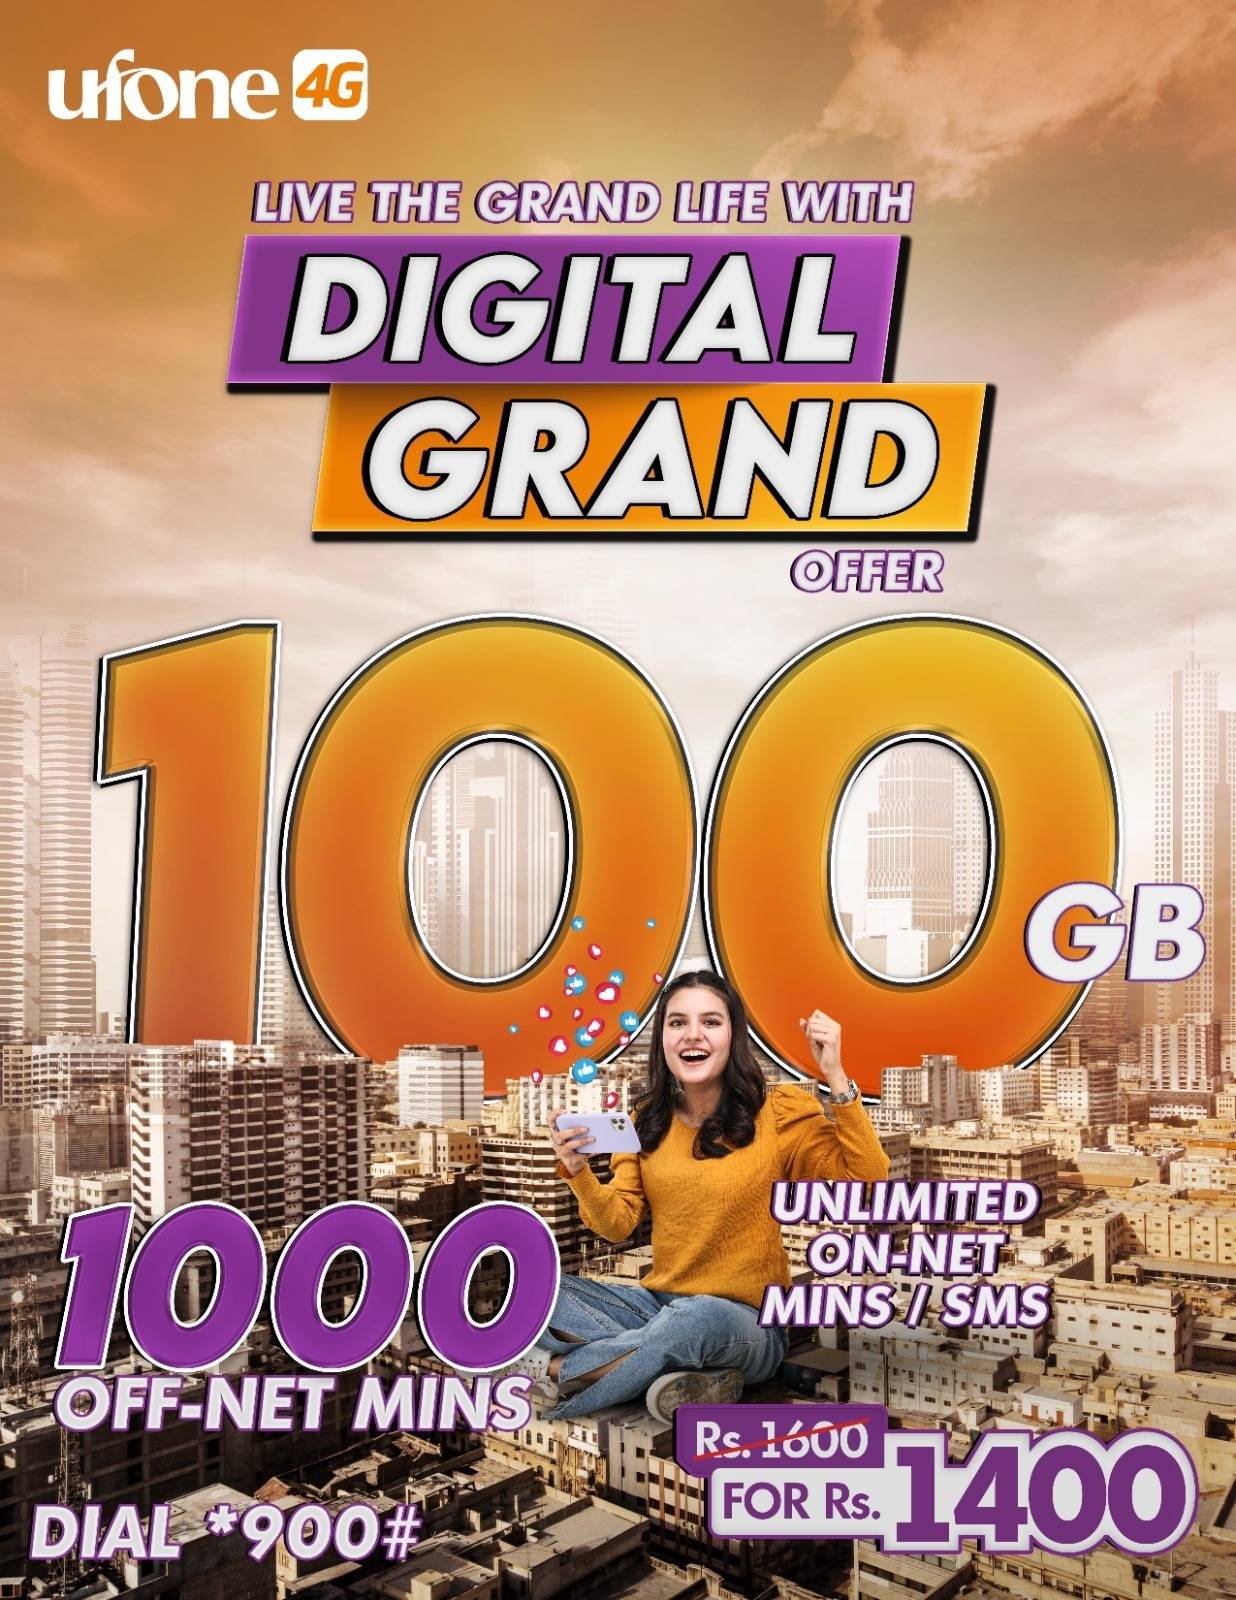 Ufone 4G introduces Digital Grand for Unmatched Connectivity